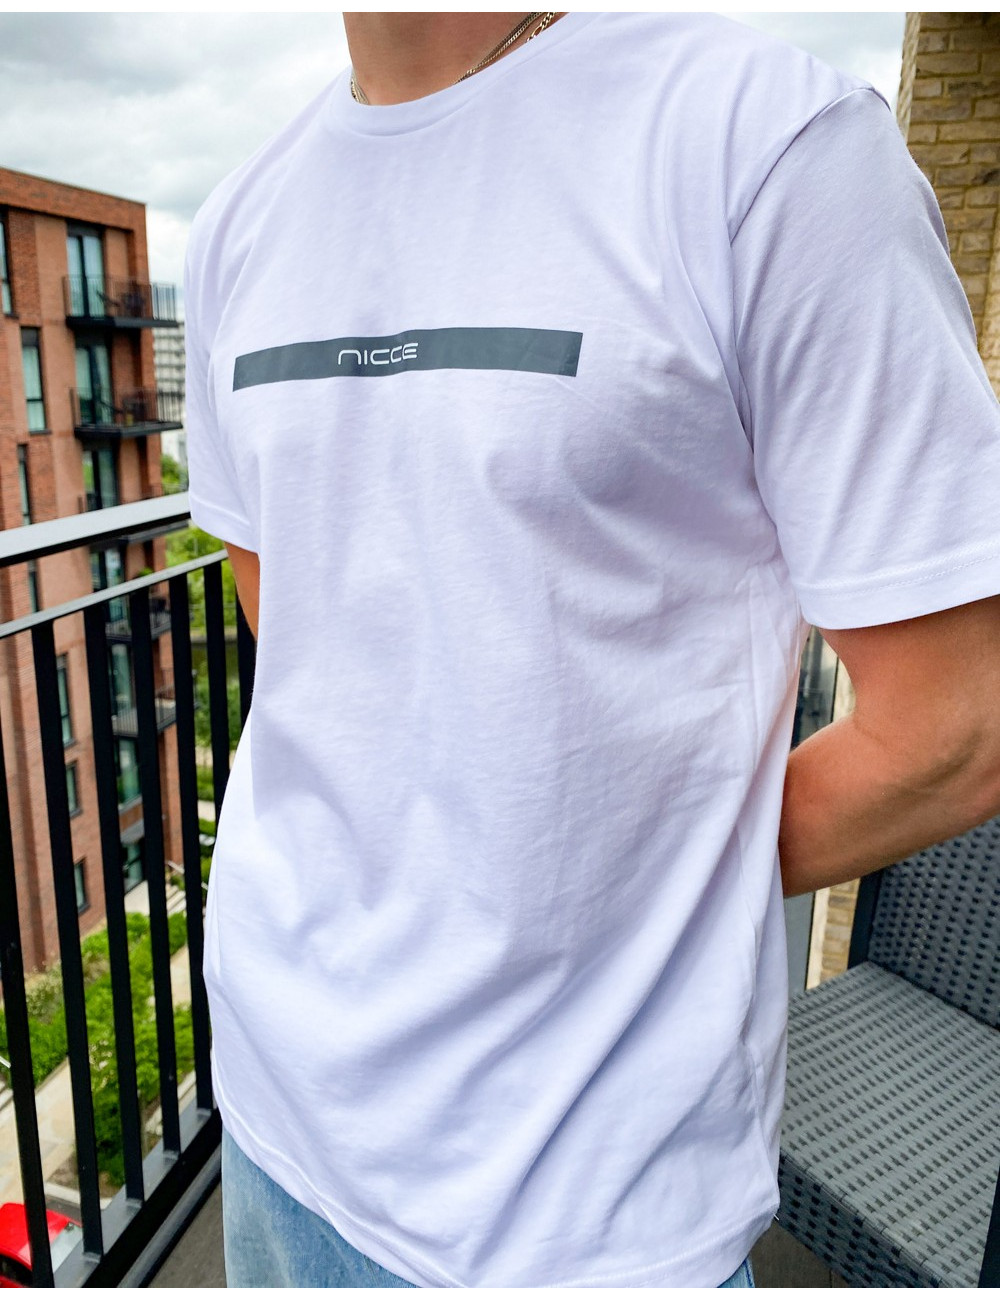 Nicce element t-shirt in white